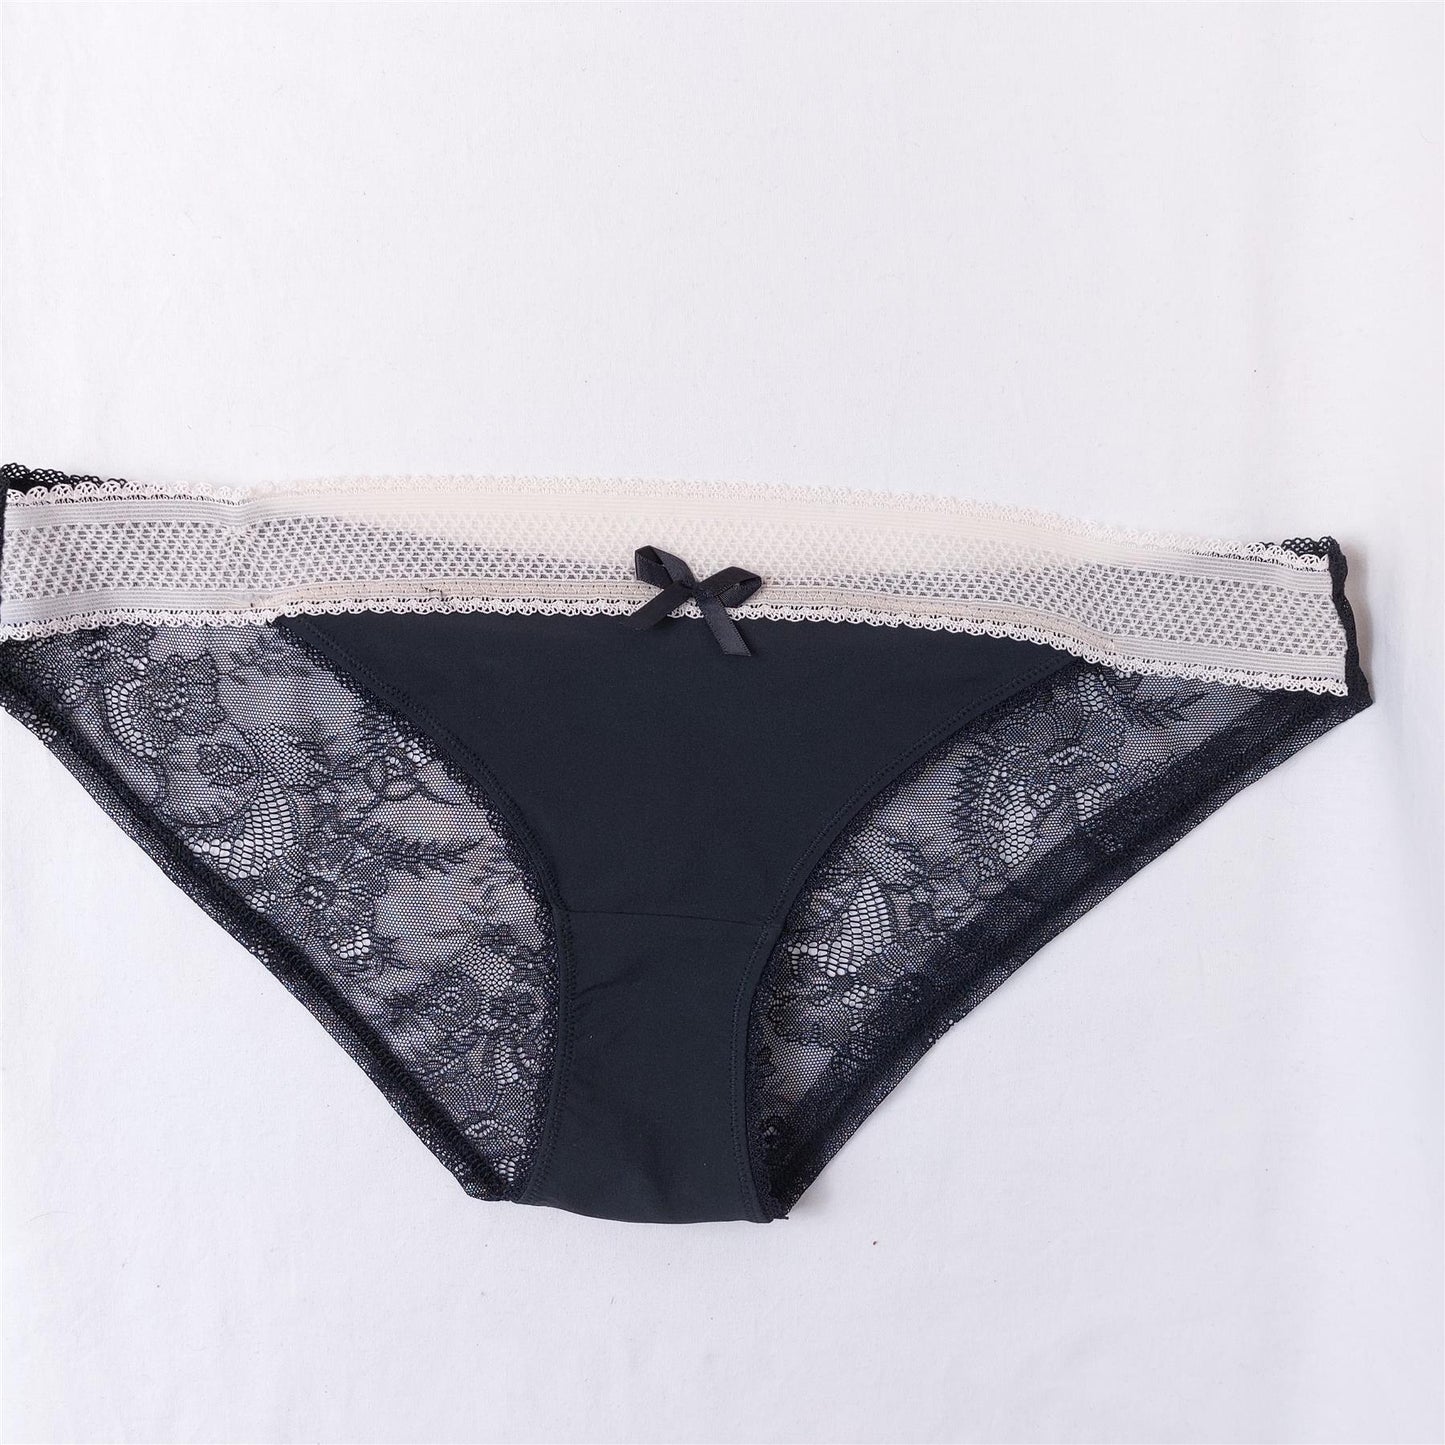 Lace Brief Knickers 3x Pairs